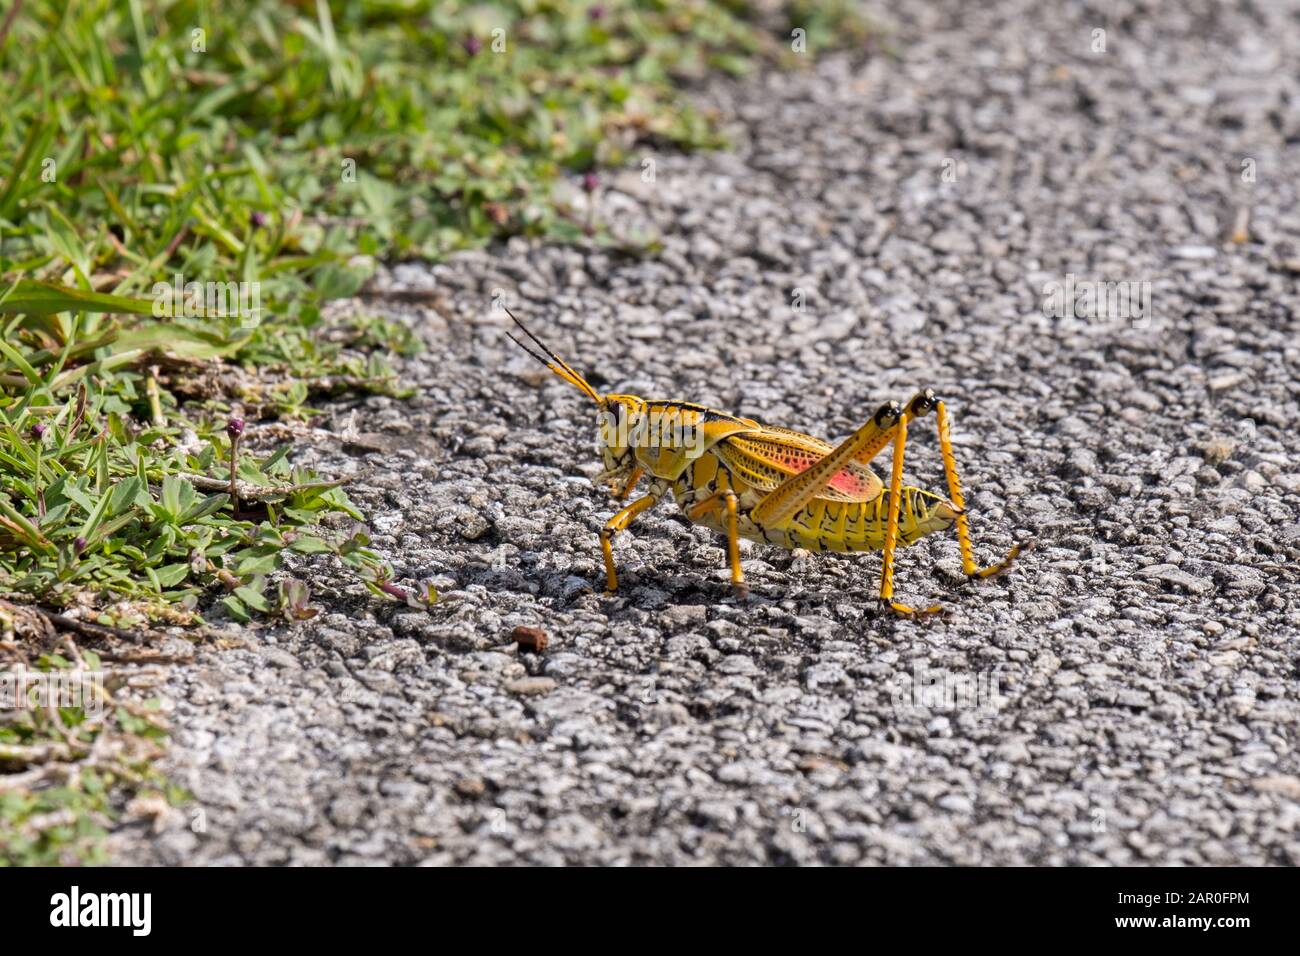 Adult eastern lubber grasshopper in the Everglades National Park, Florida Stock Photo